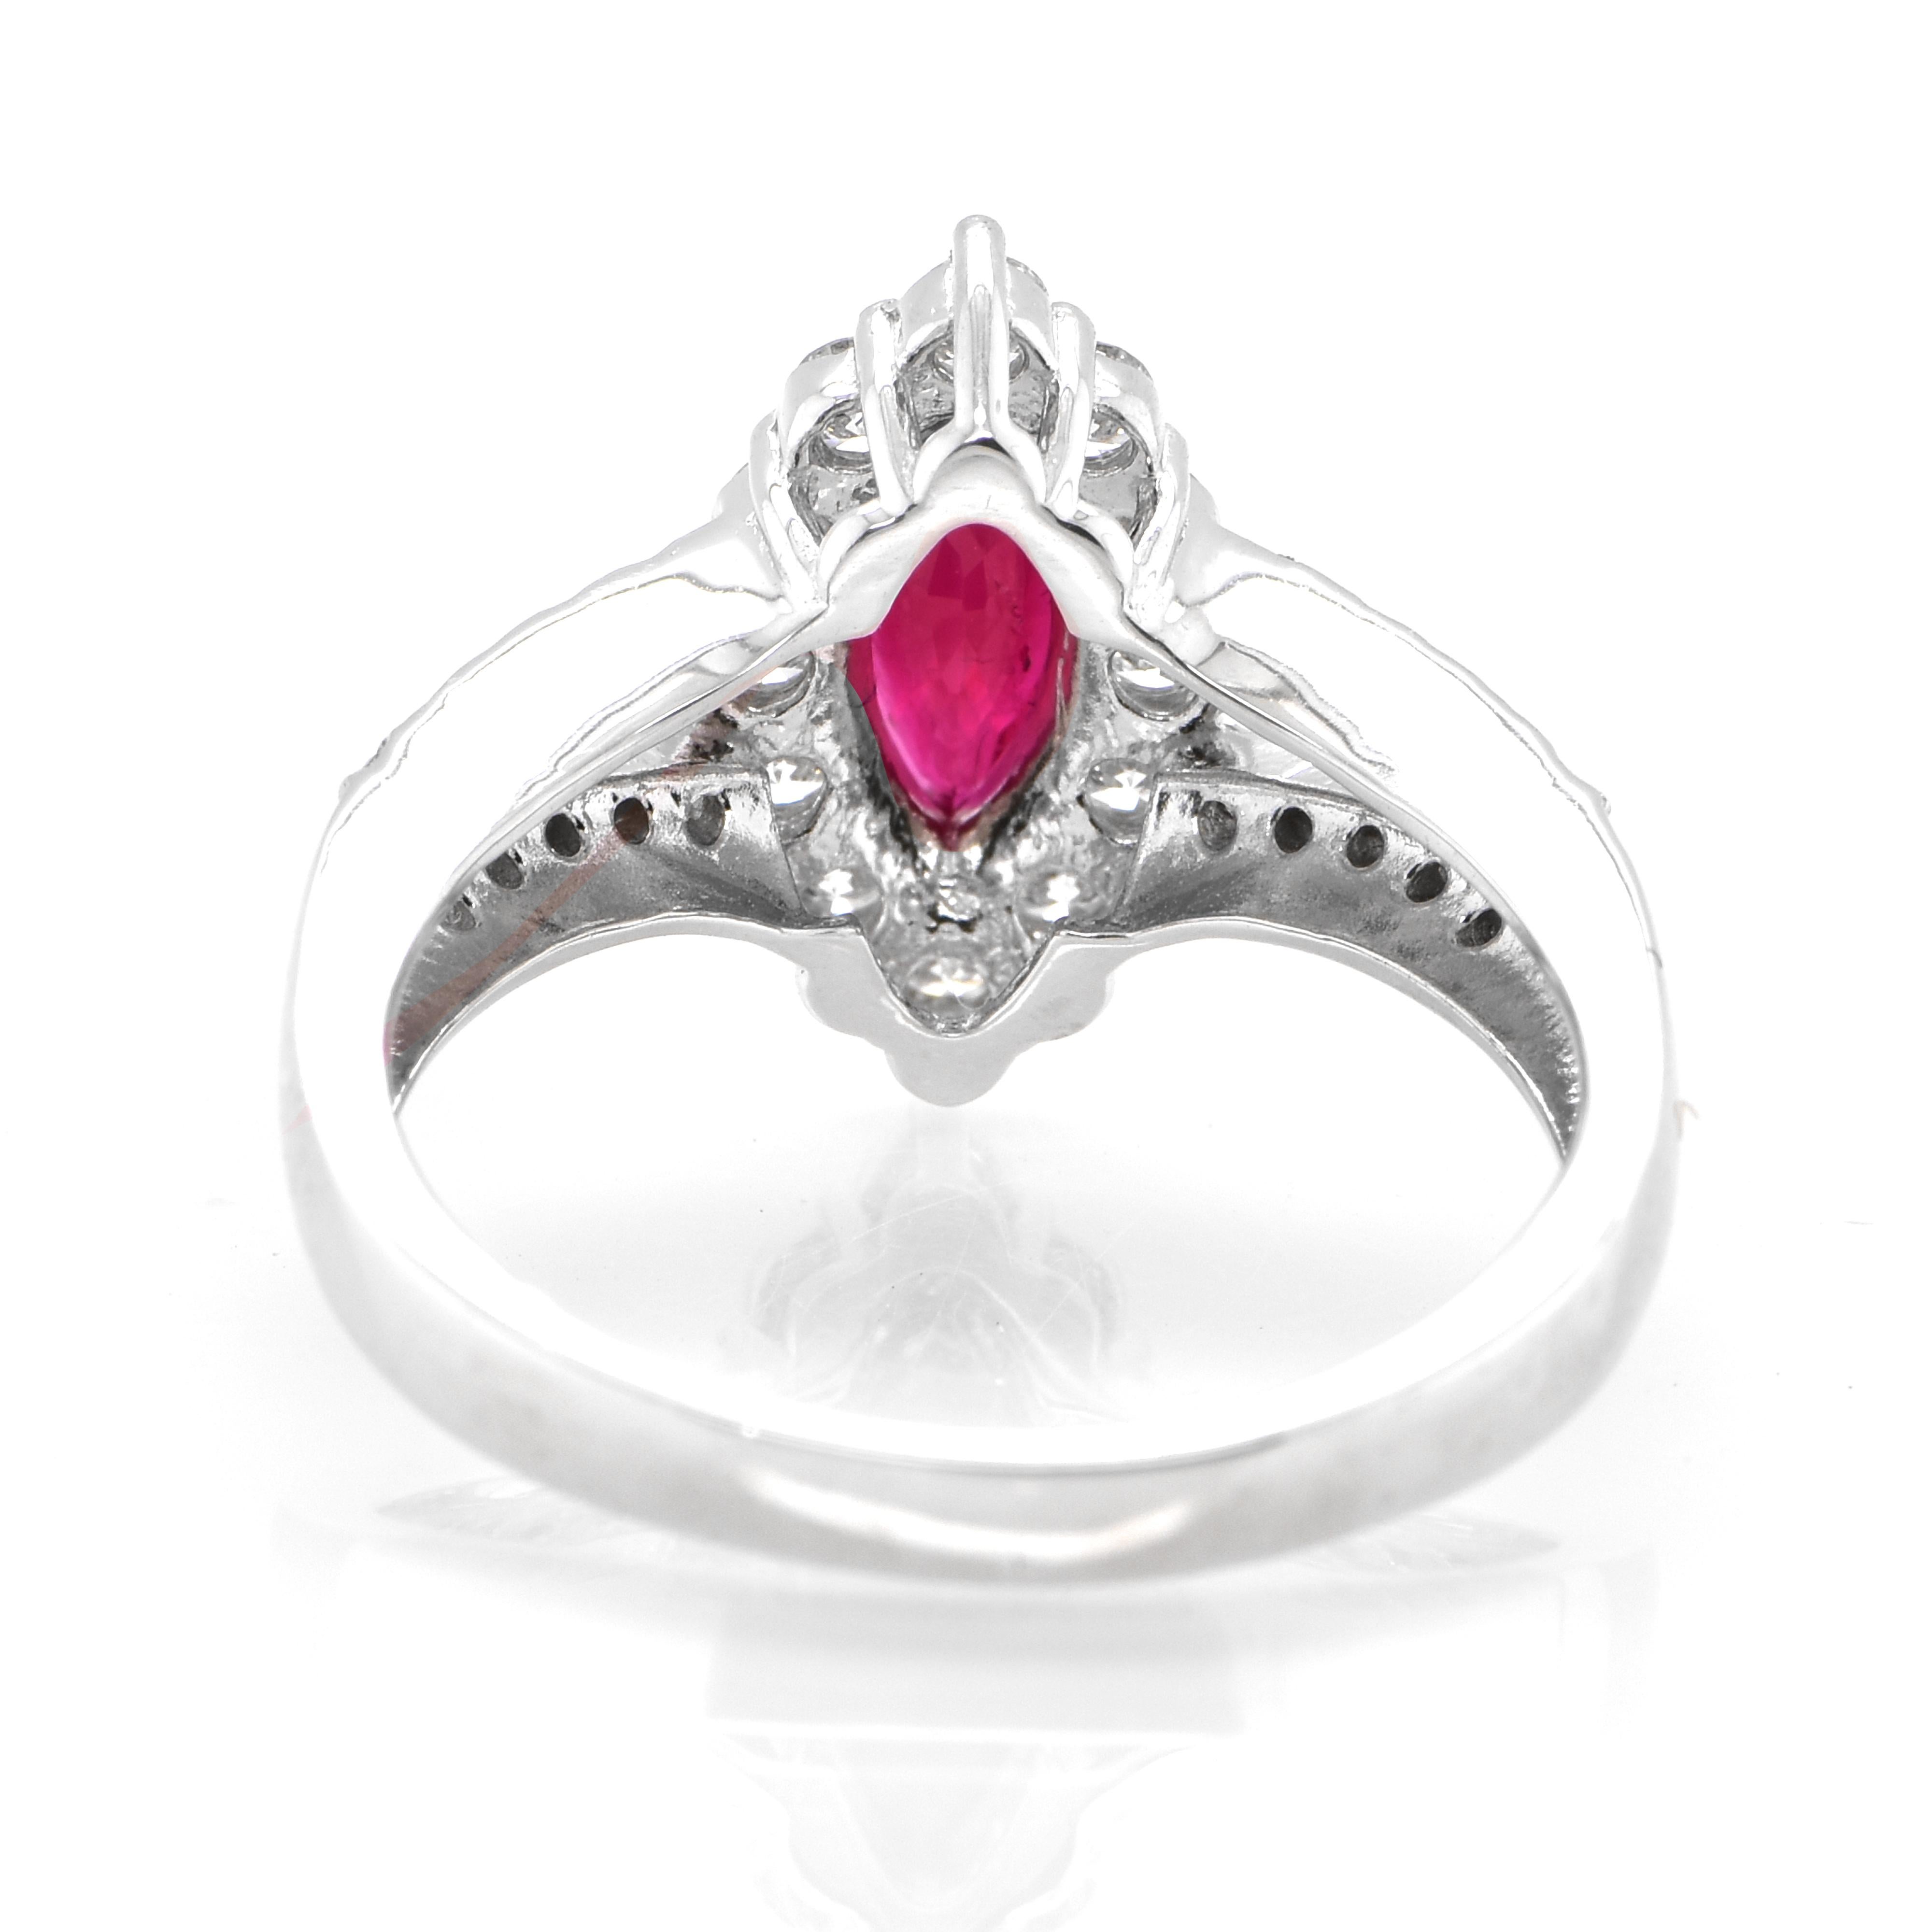 Women's GIA Certified 1.02 Carat Burmese, Pigeon's Blood Color Ruby Ring set in Platinum For Sale